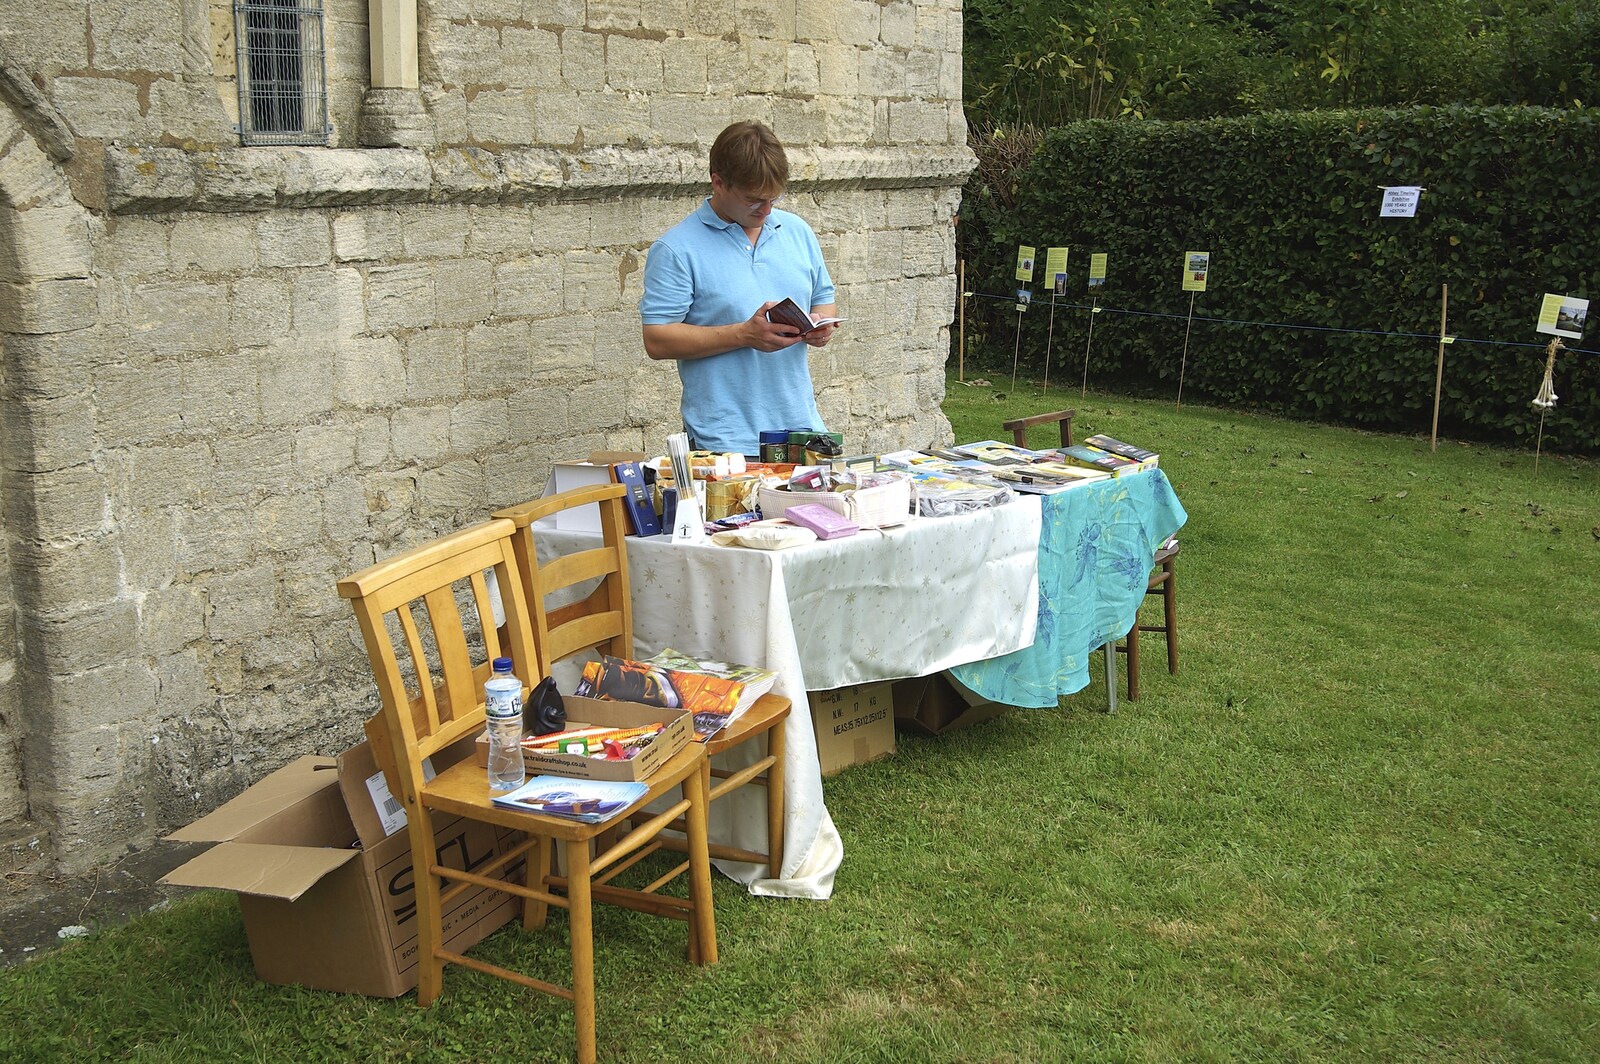 There's a bric-a-brac stall outside from Stourbridge Fair at the Leper Chapel, Cambridge - 8th September 2007